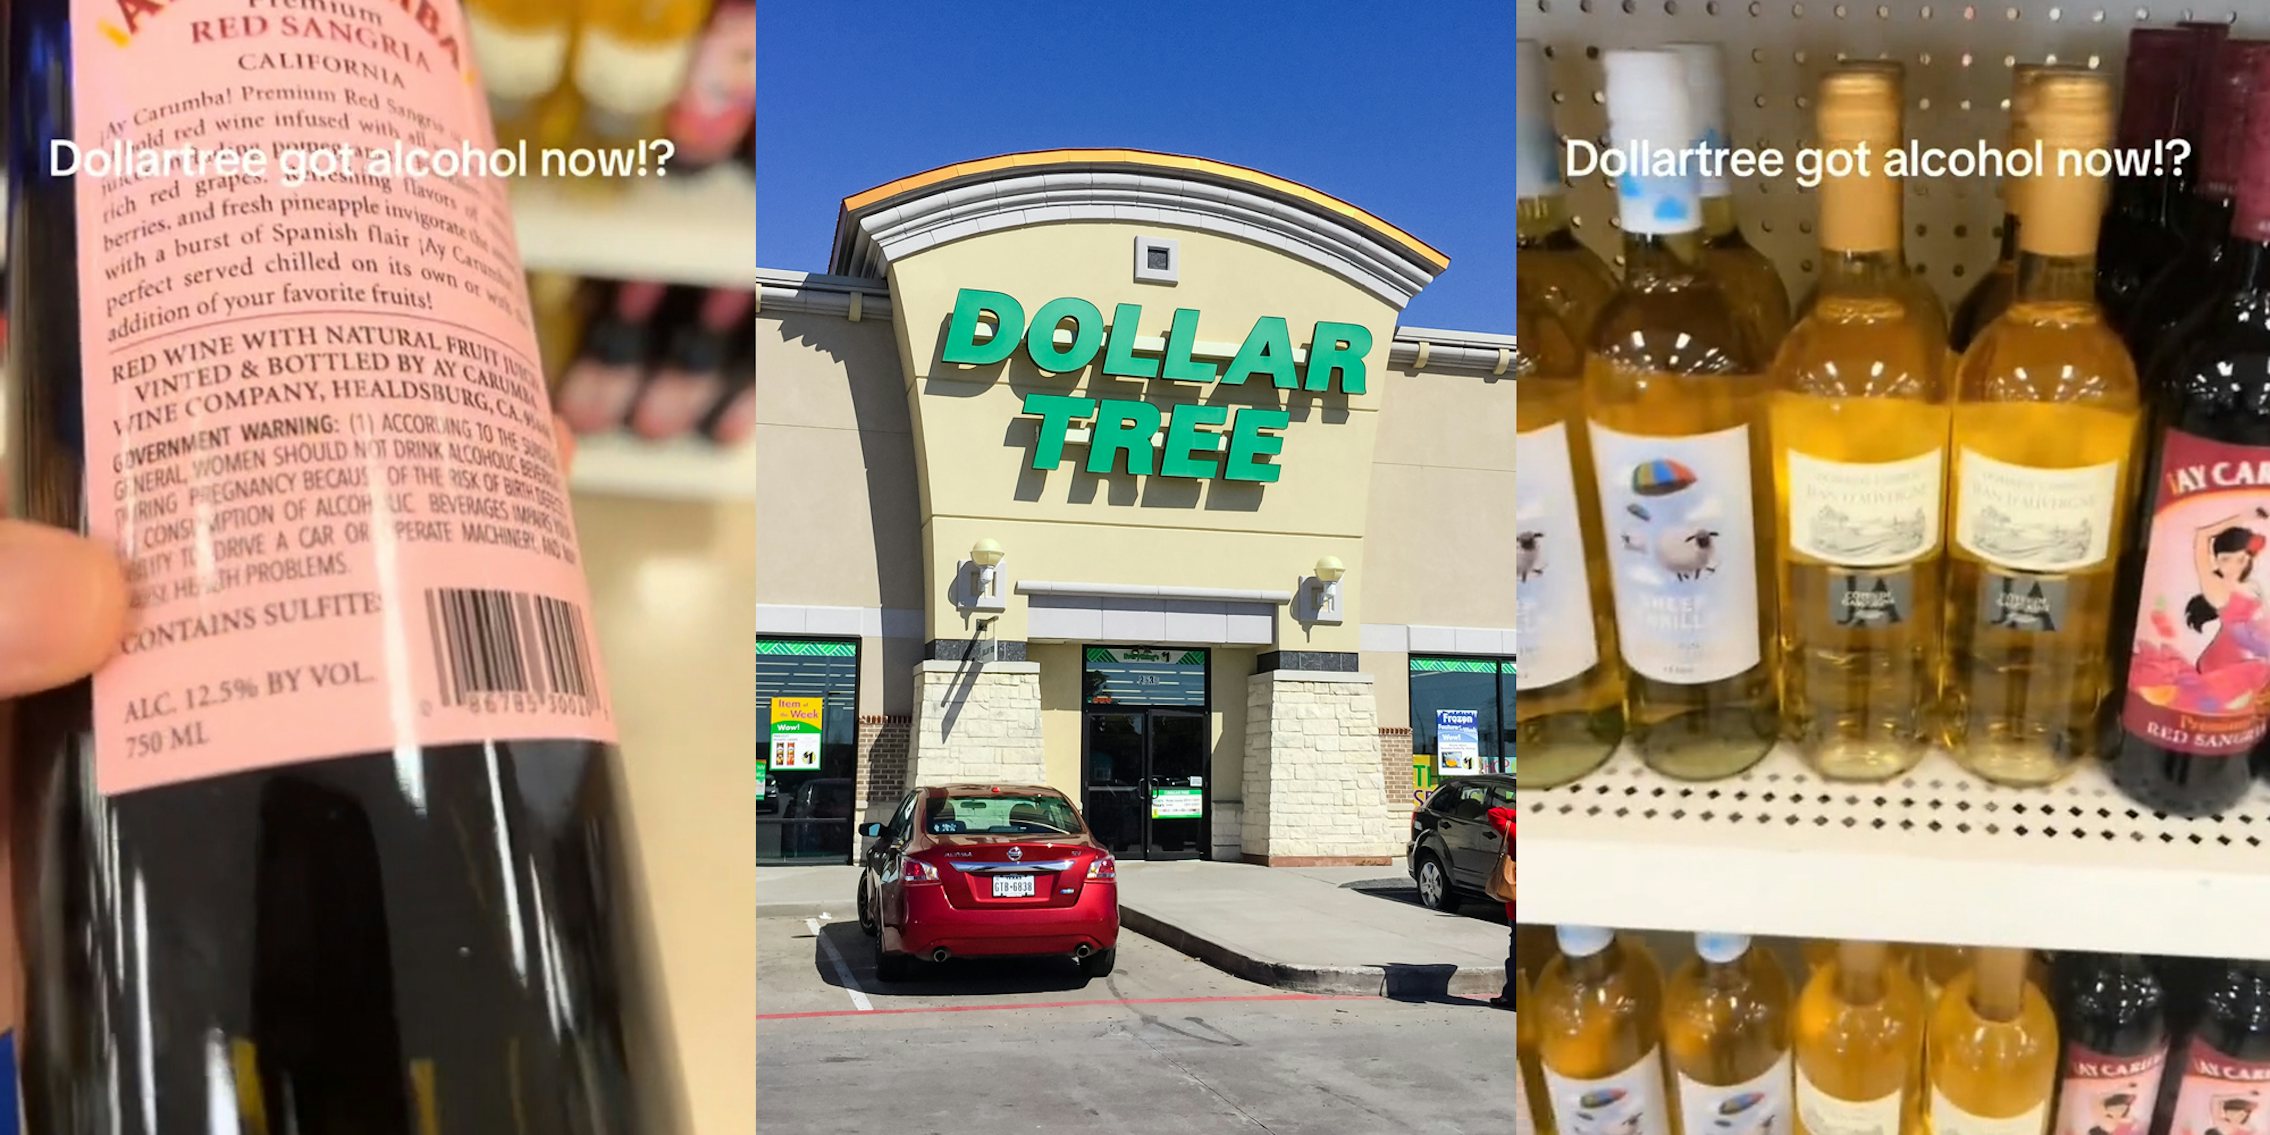 customer holding sangria at Dollar Tree with caption 'Dollar tree got alcohol now?' (l) Dollar Tree building with sign (c) alcohol display in Dollar Tree caption 'Dollar tree got alcohol now?' (r)